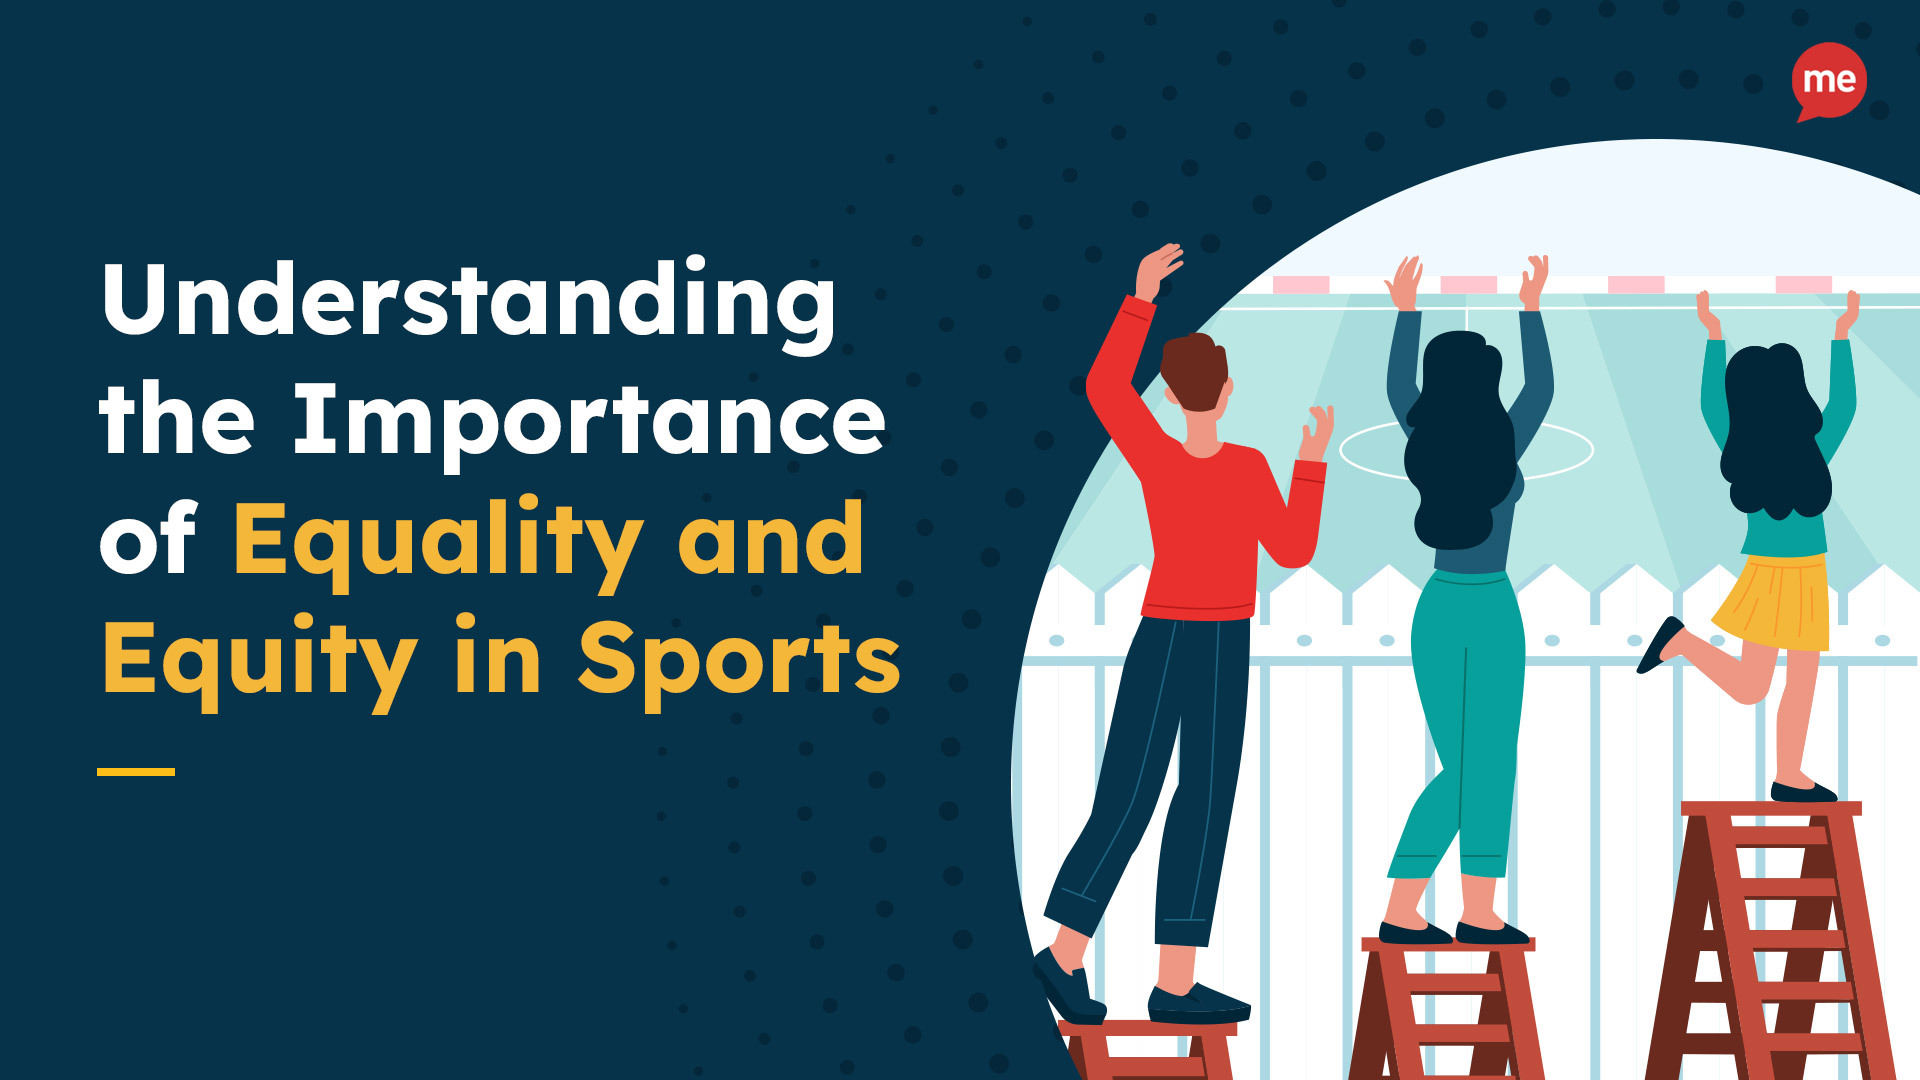 Understanding the Importance of Equality and Equity in Sports